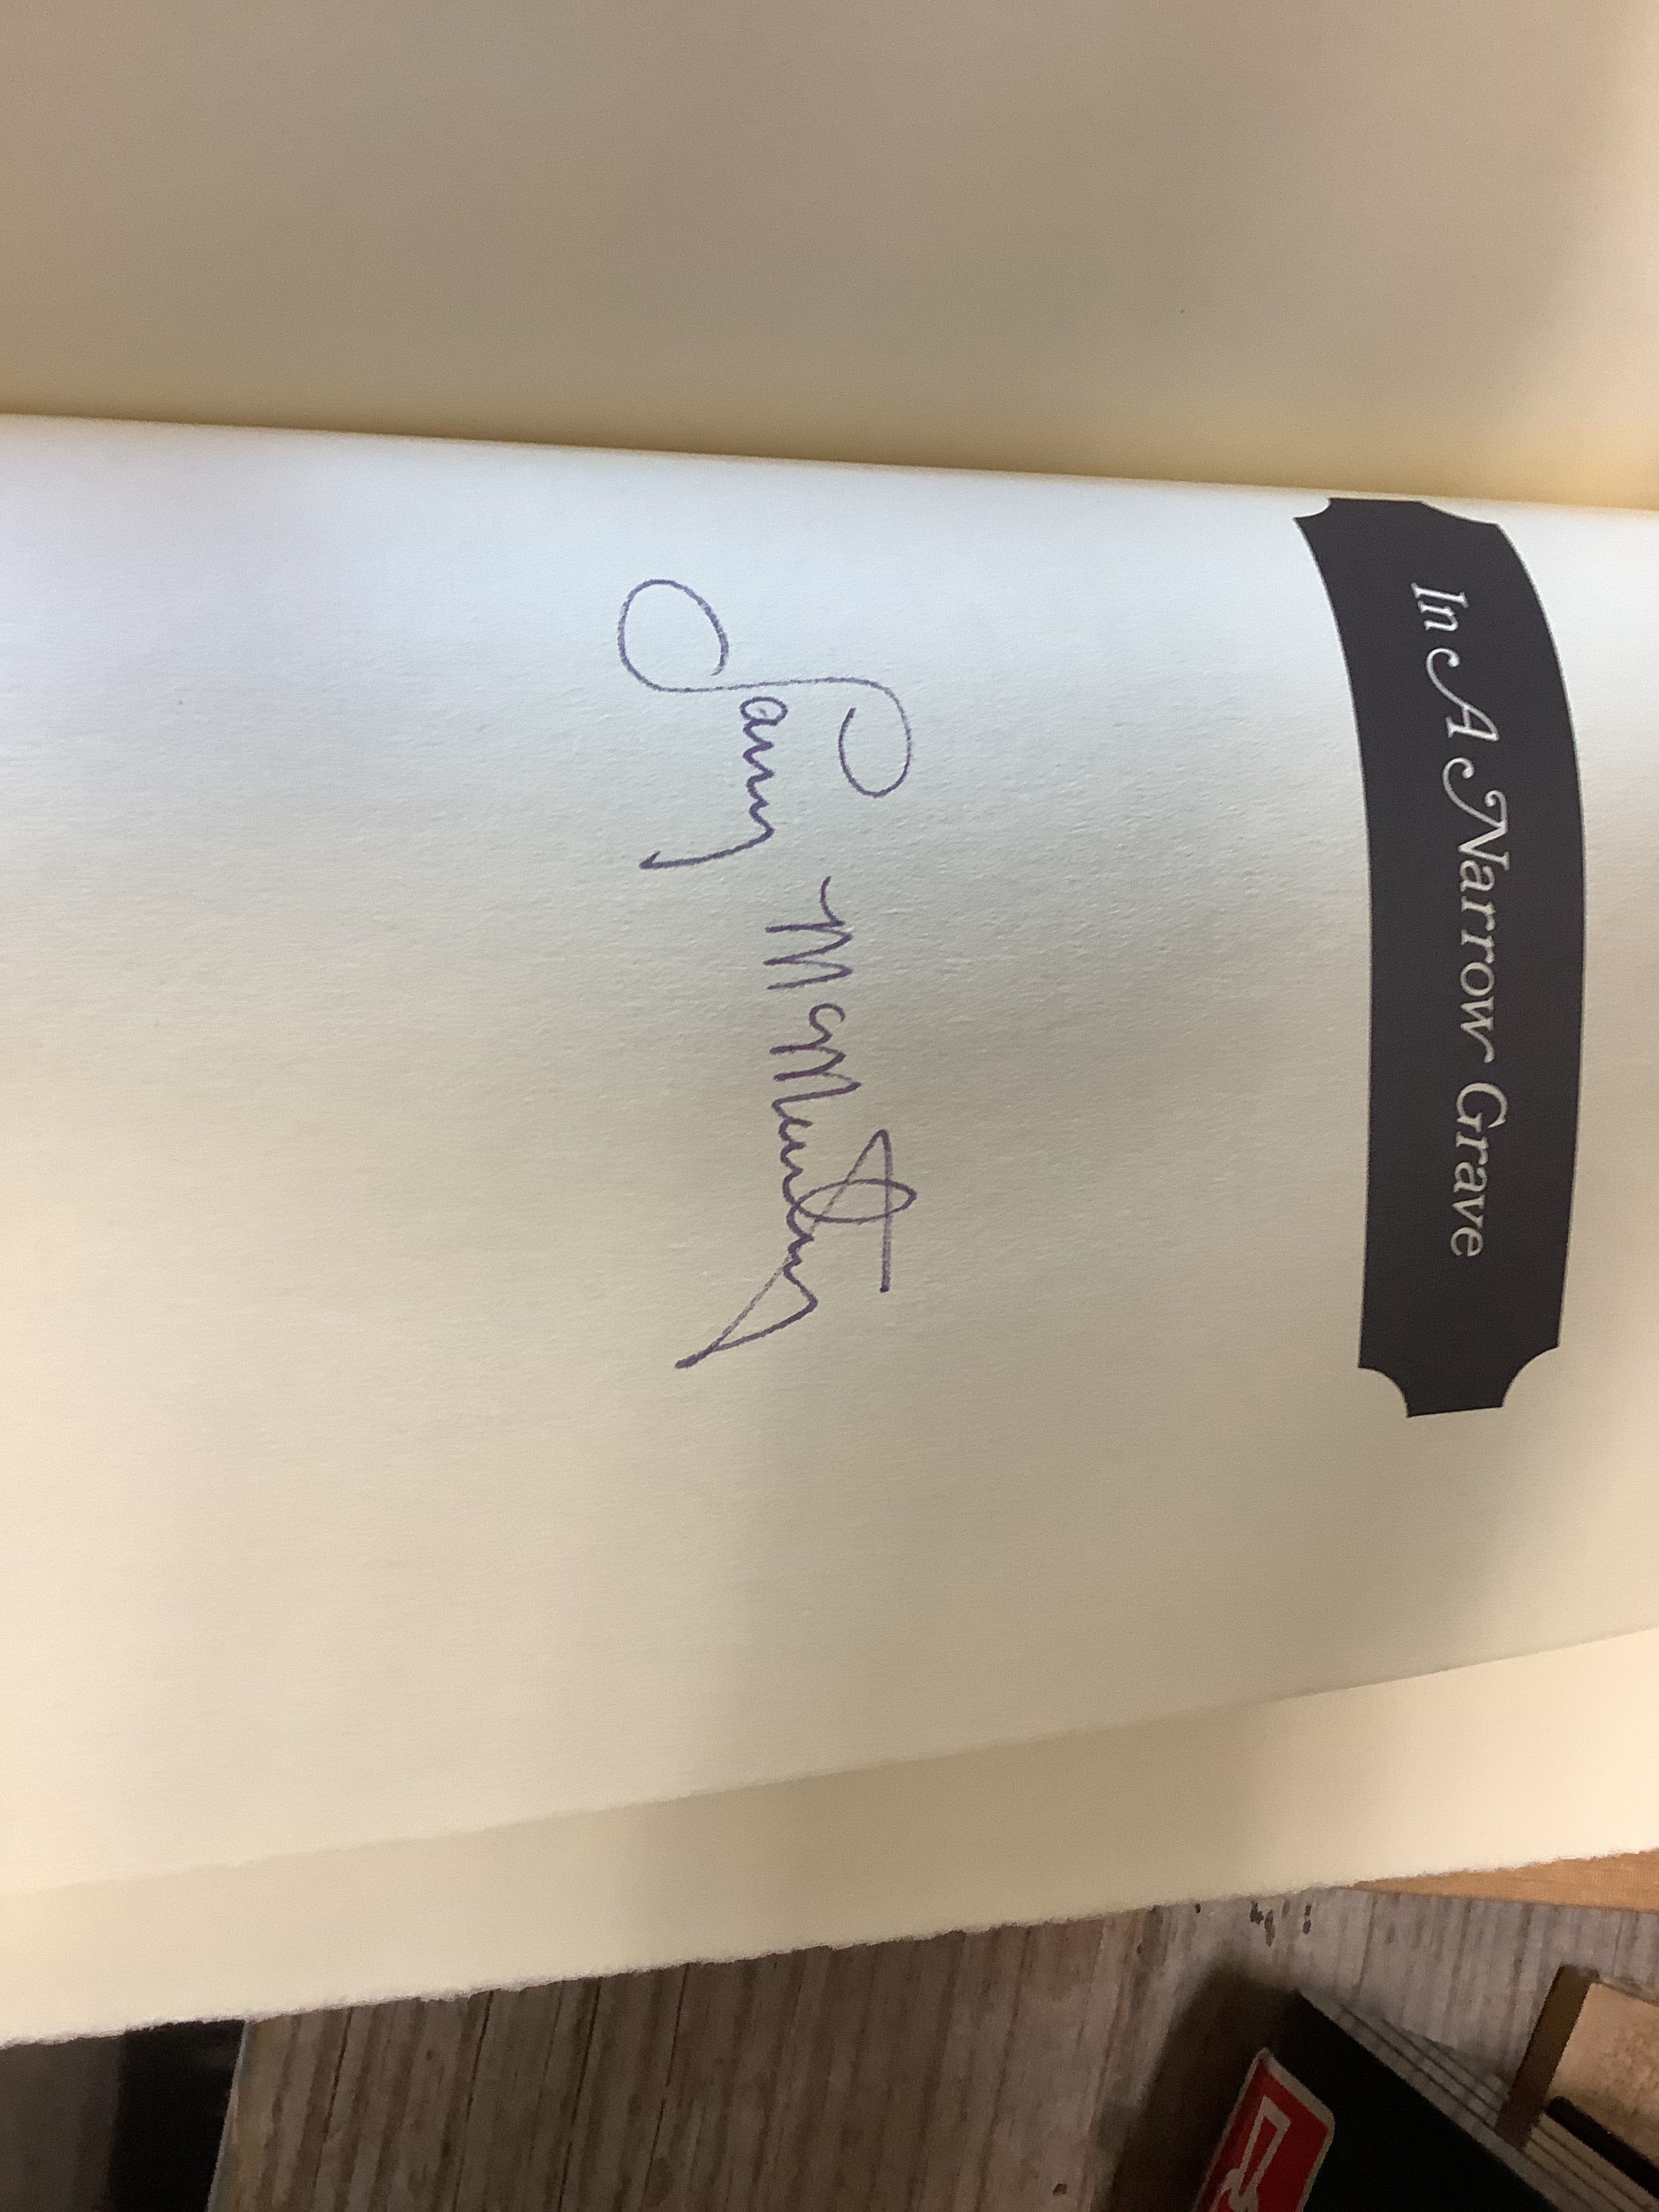 BOOKs - Larry McMurtry signed - In A Narrow Grave